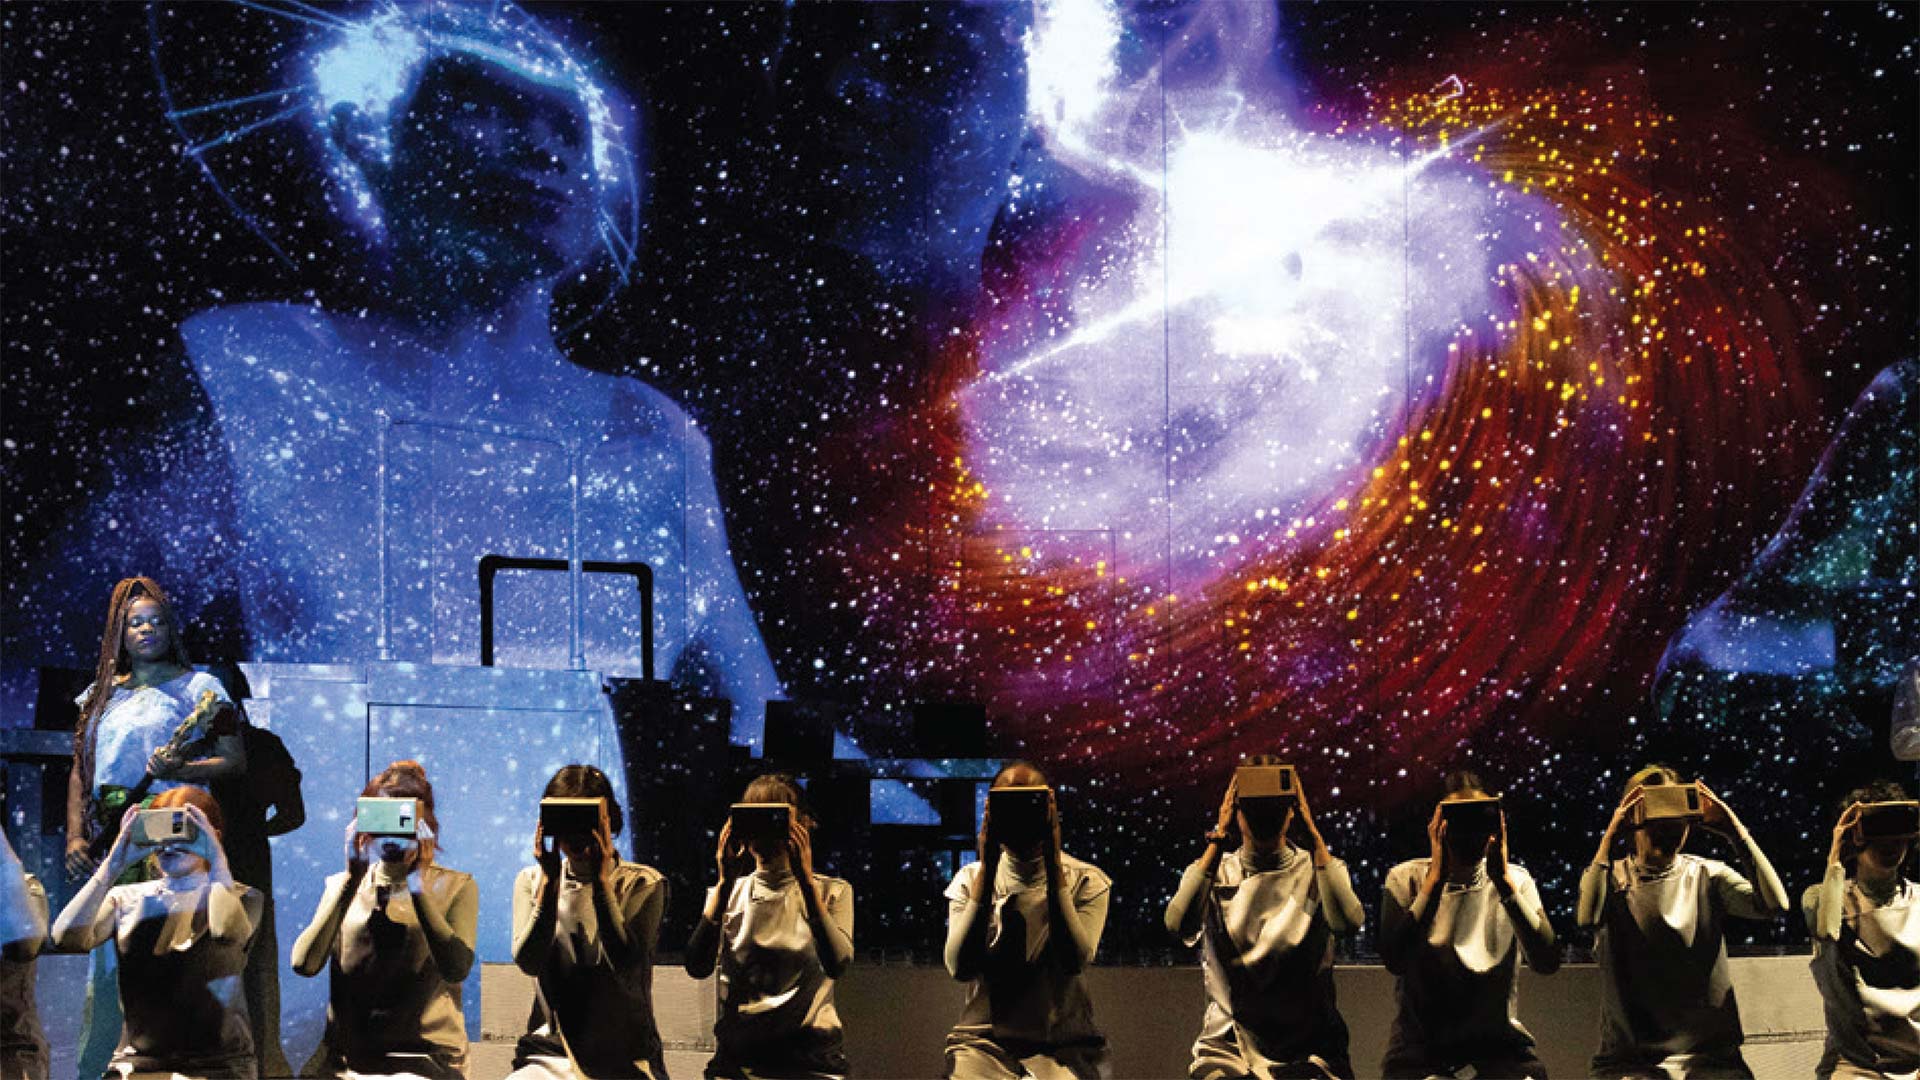 stage performance with starfield visualization and 9 women kneeling and looking into viewboxes alongside a guitarist